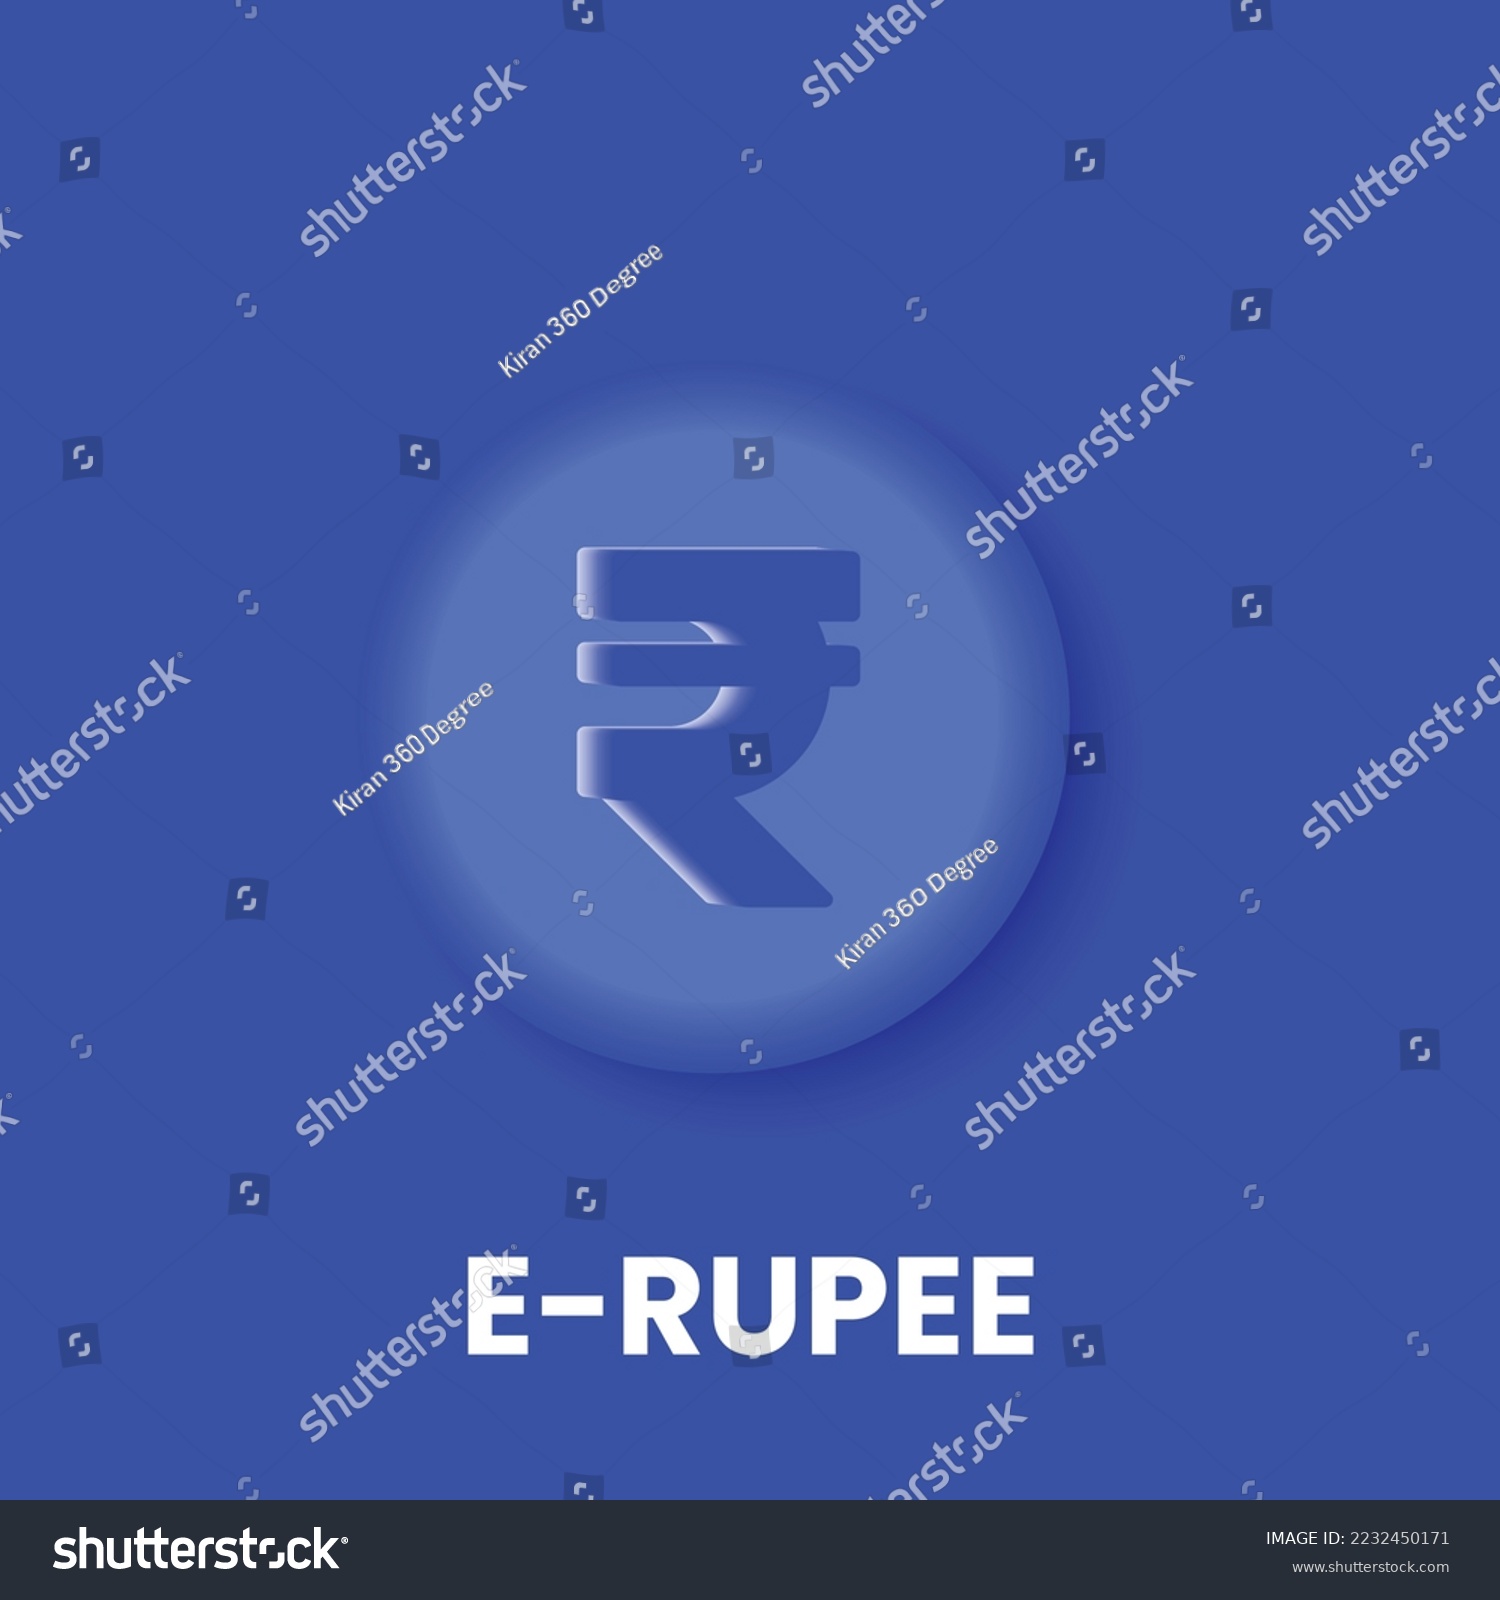 SVG of E Rupee or Digital Rupee 3D vector illustration, The Indian currency rupee INR blockchain finance technology concept logo and symbol isolated on blue background svg